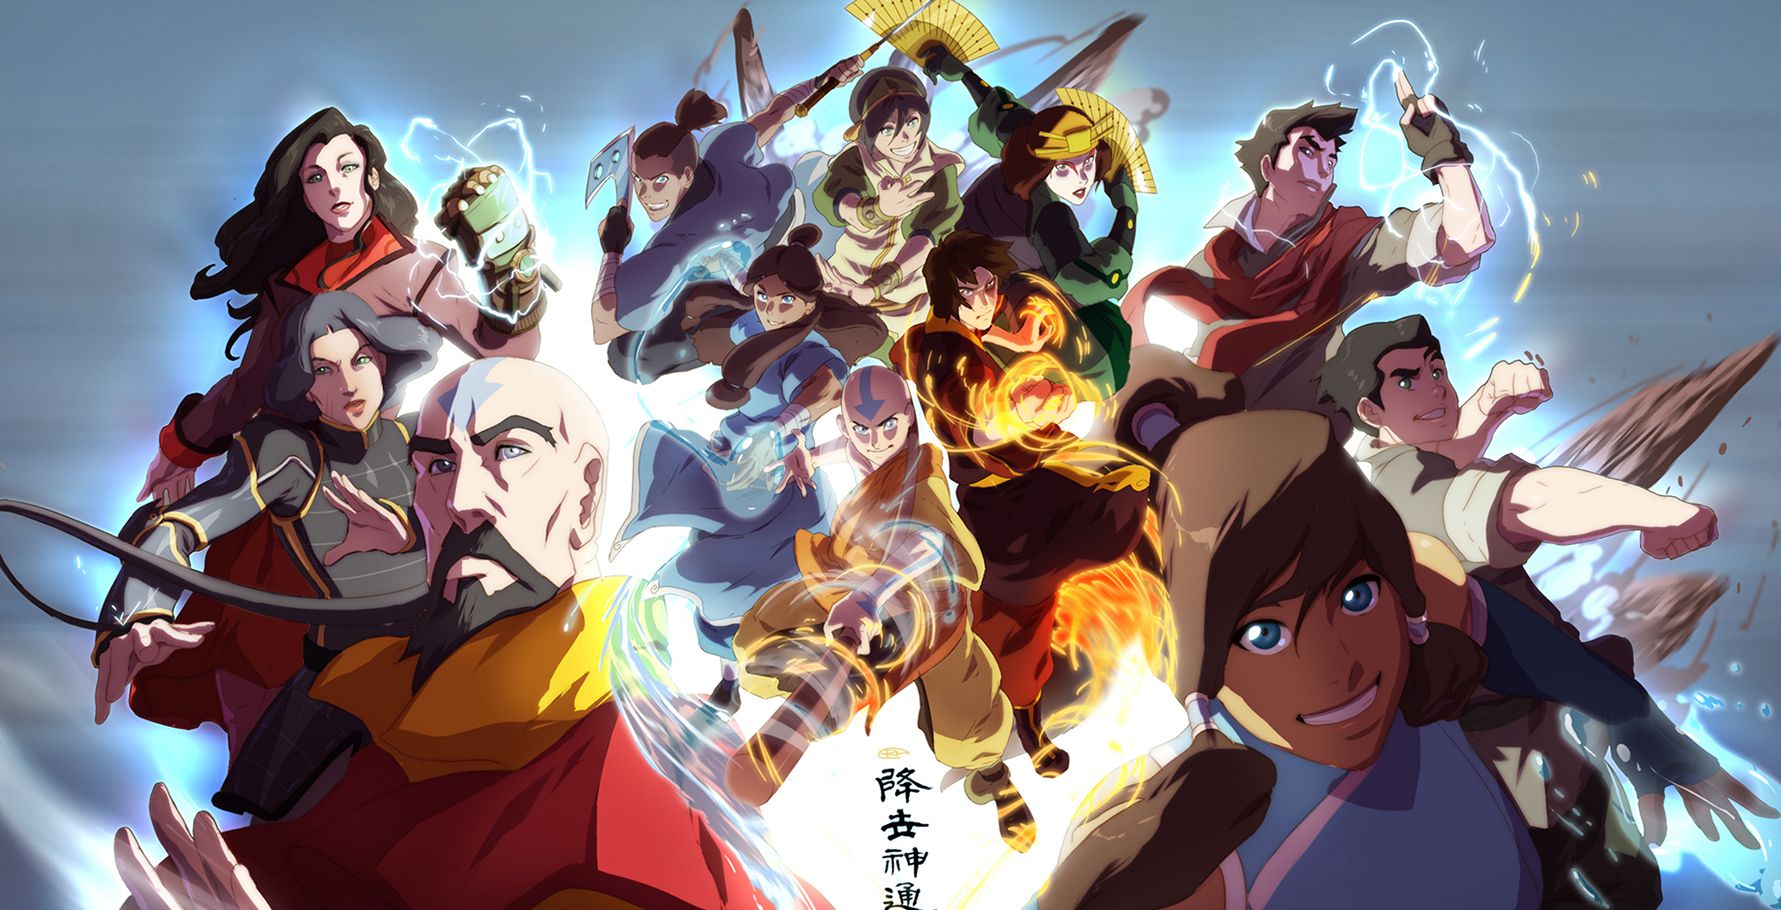 Avatar-The-Last-Airbender-and-Legend-Of-Korra